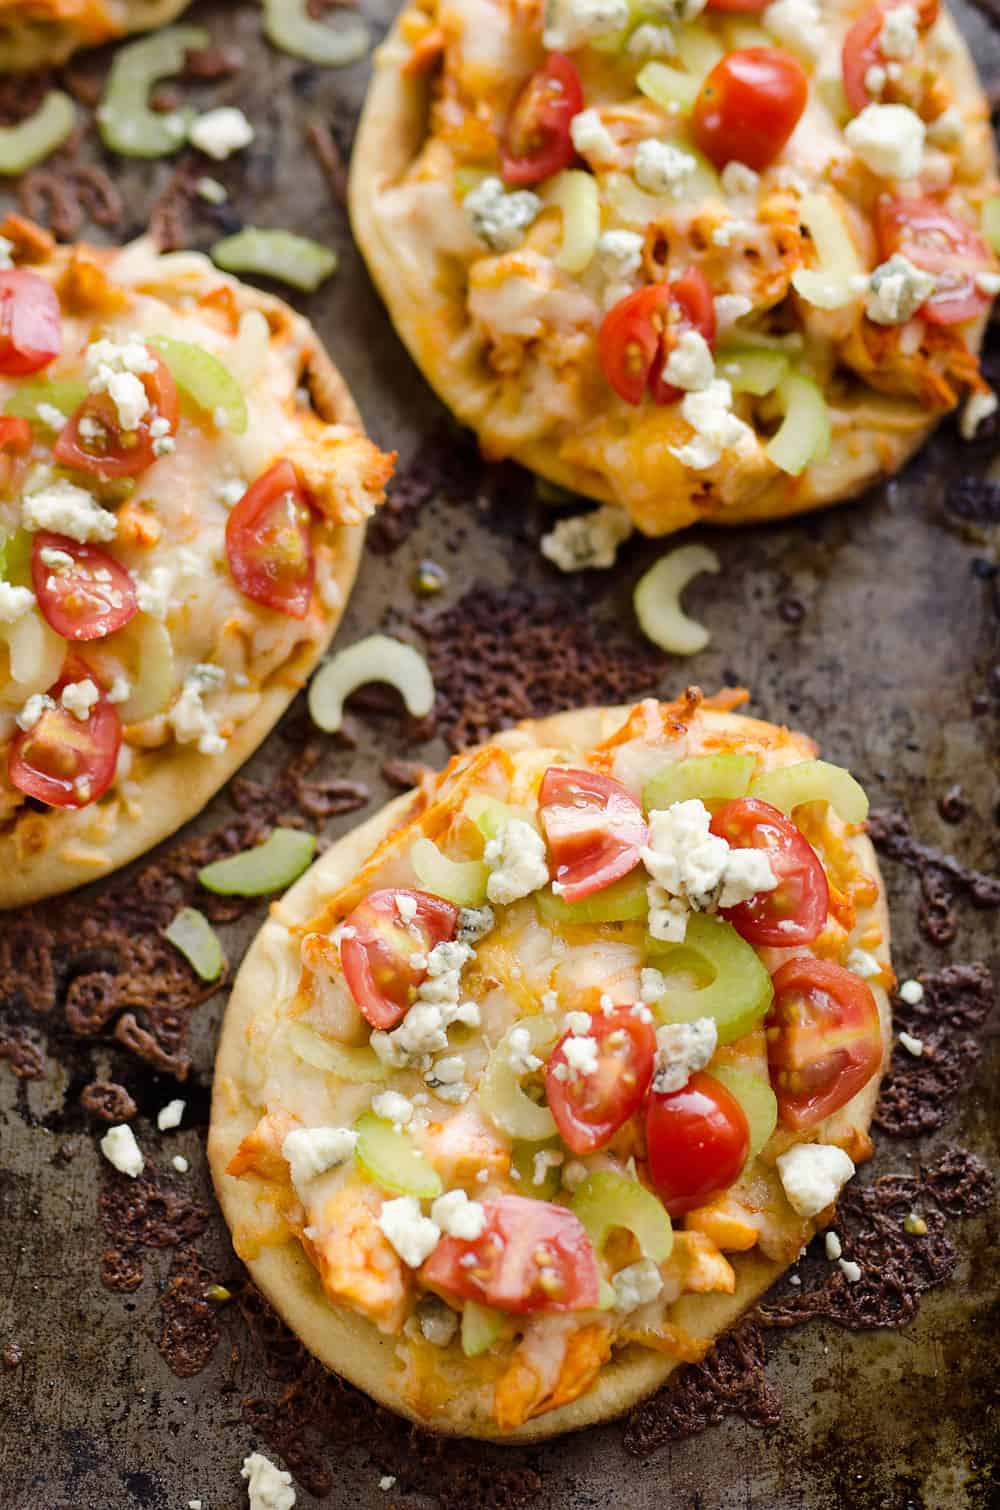 Mini Buffalo Turkey Pizzas are an easy and flavorful way to use up leftover turkey for a quick and delicious dinner idea or crowd pleasing finger food for game day!